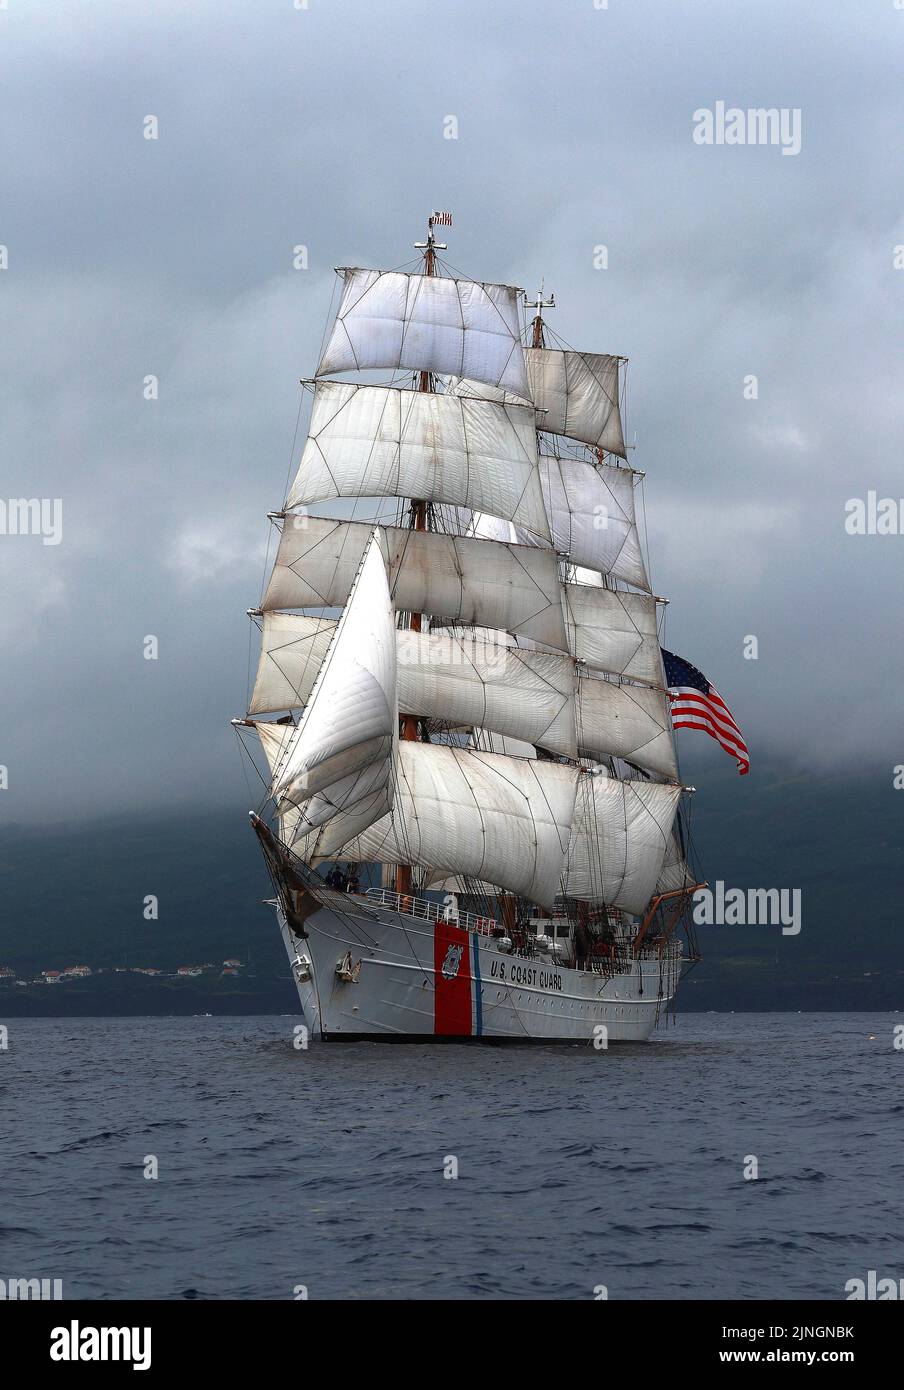 The U.S. Coast Guard cutter USCGC Eagle tall ship displaying full sails as it departs for the Atlantic Ocean, July 2, 2019 off the coast of the Azores. Stock Photo